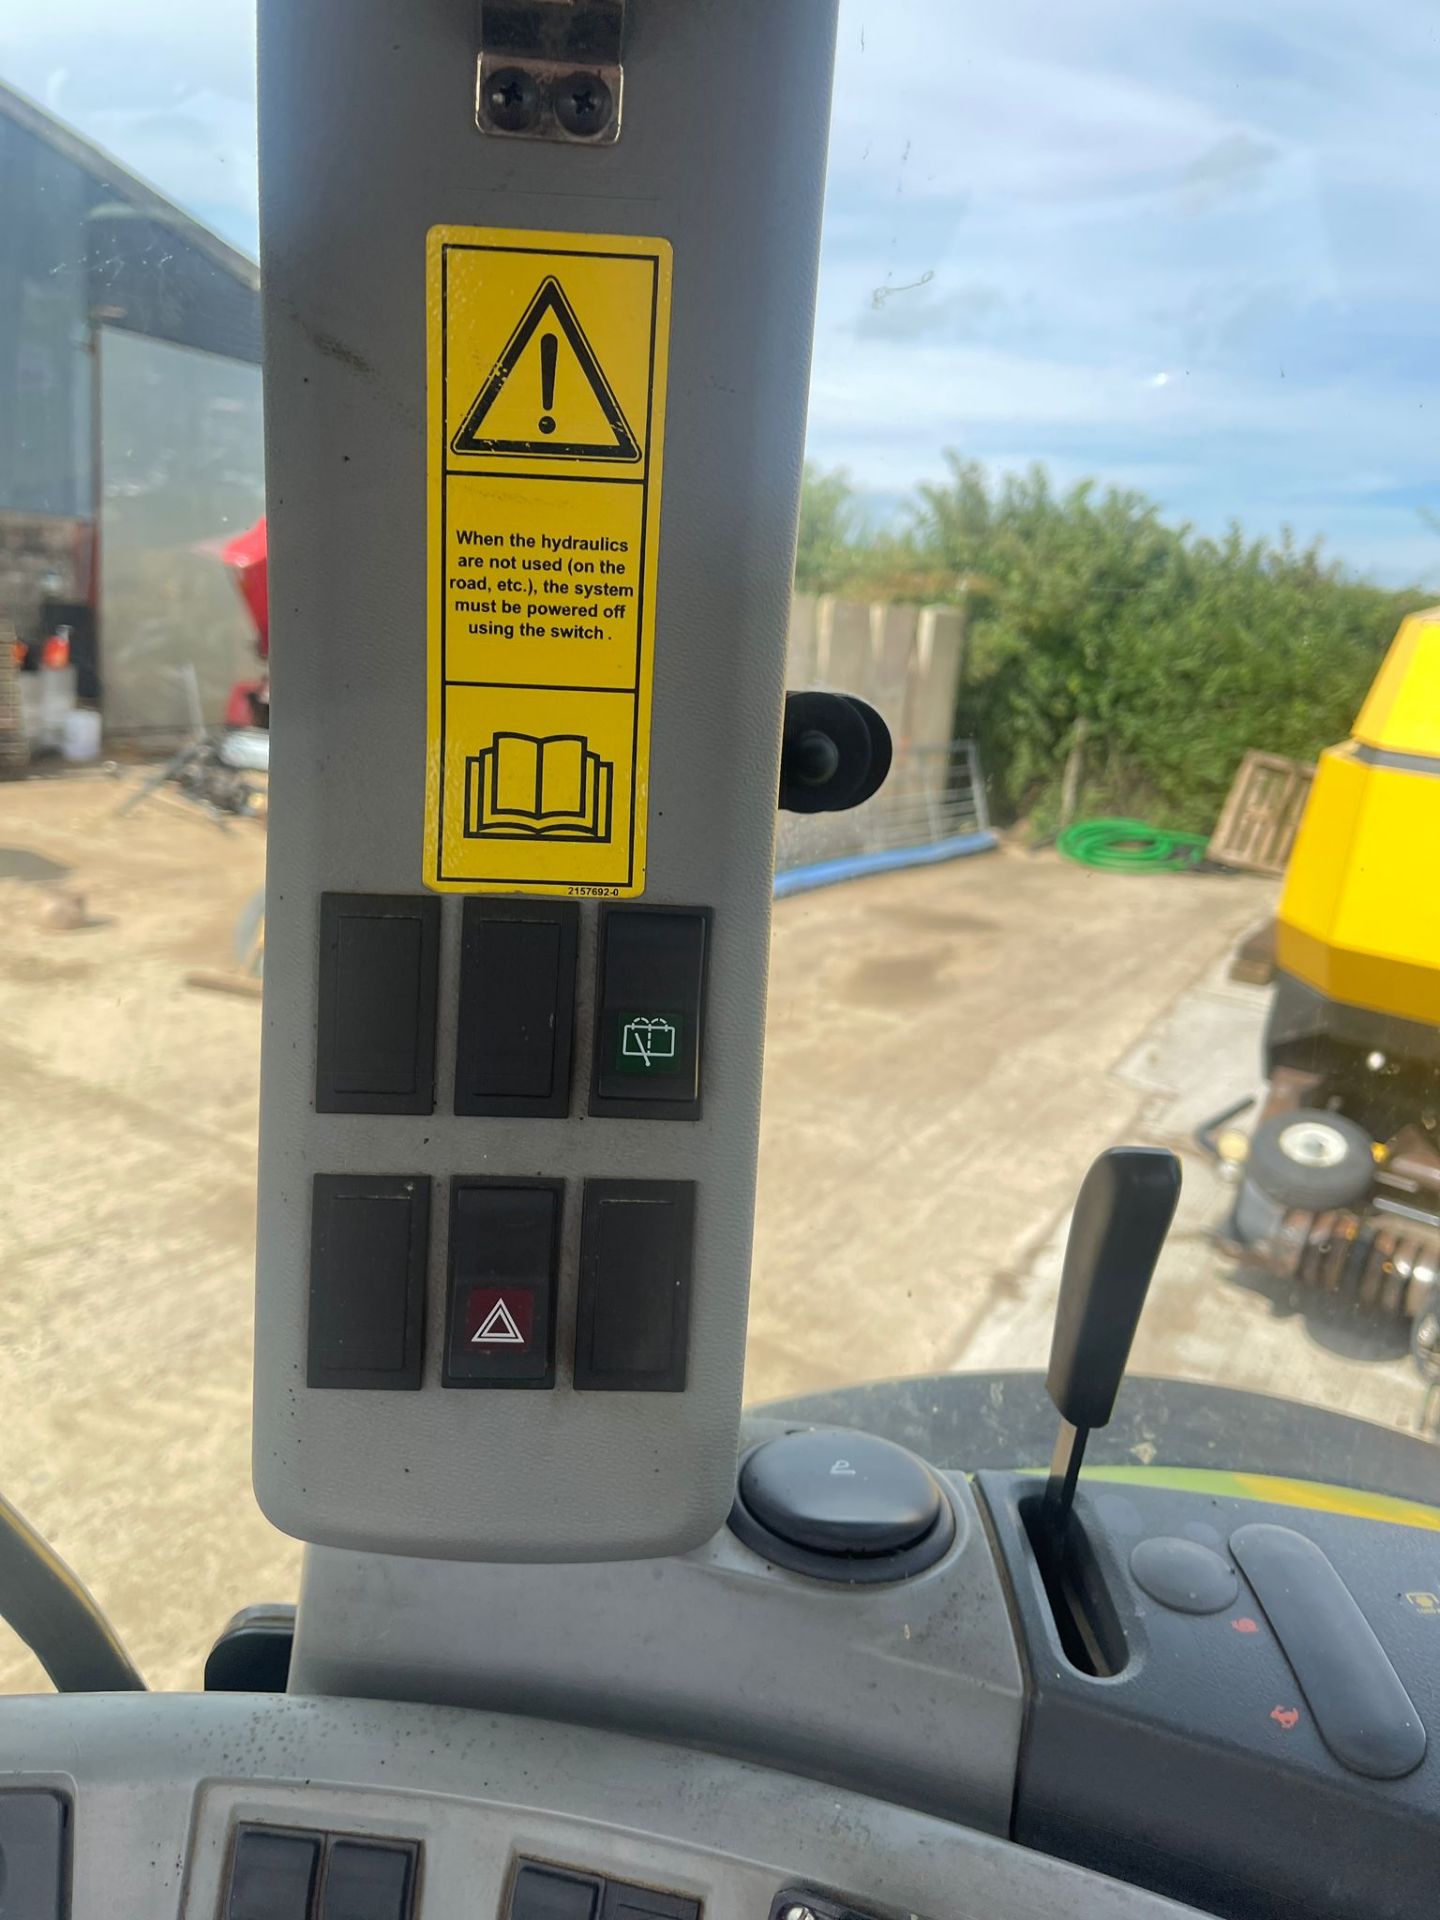 2008 CLAAS ARION 510C LOADER - Image 8 of 15